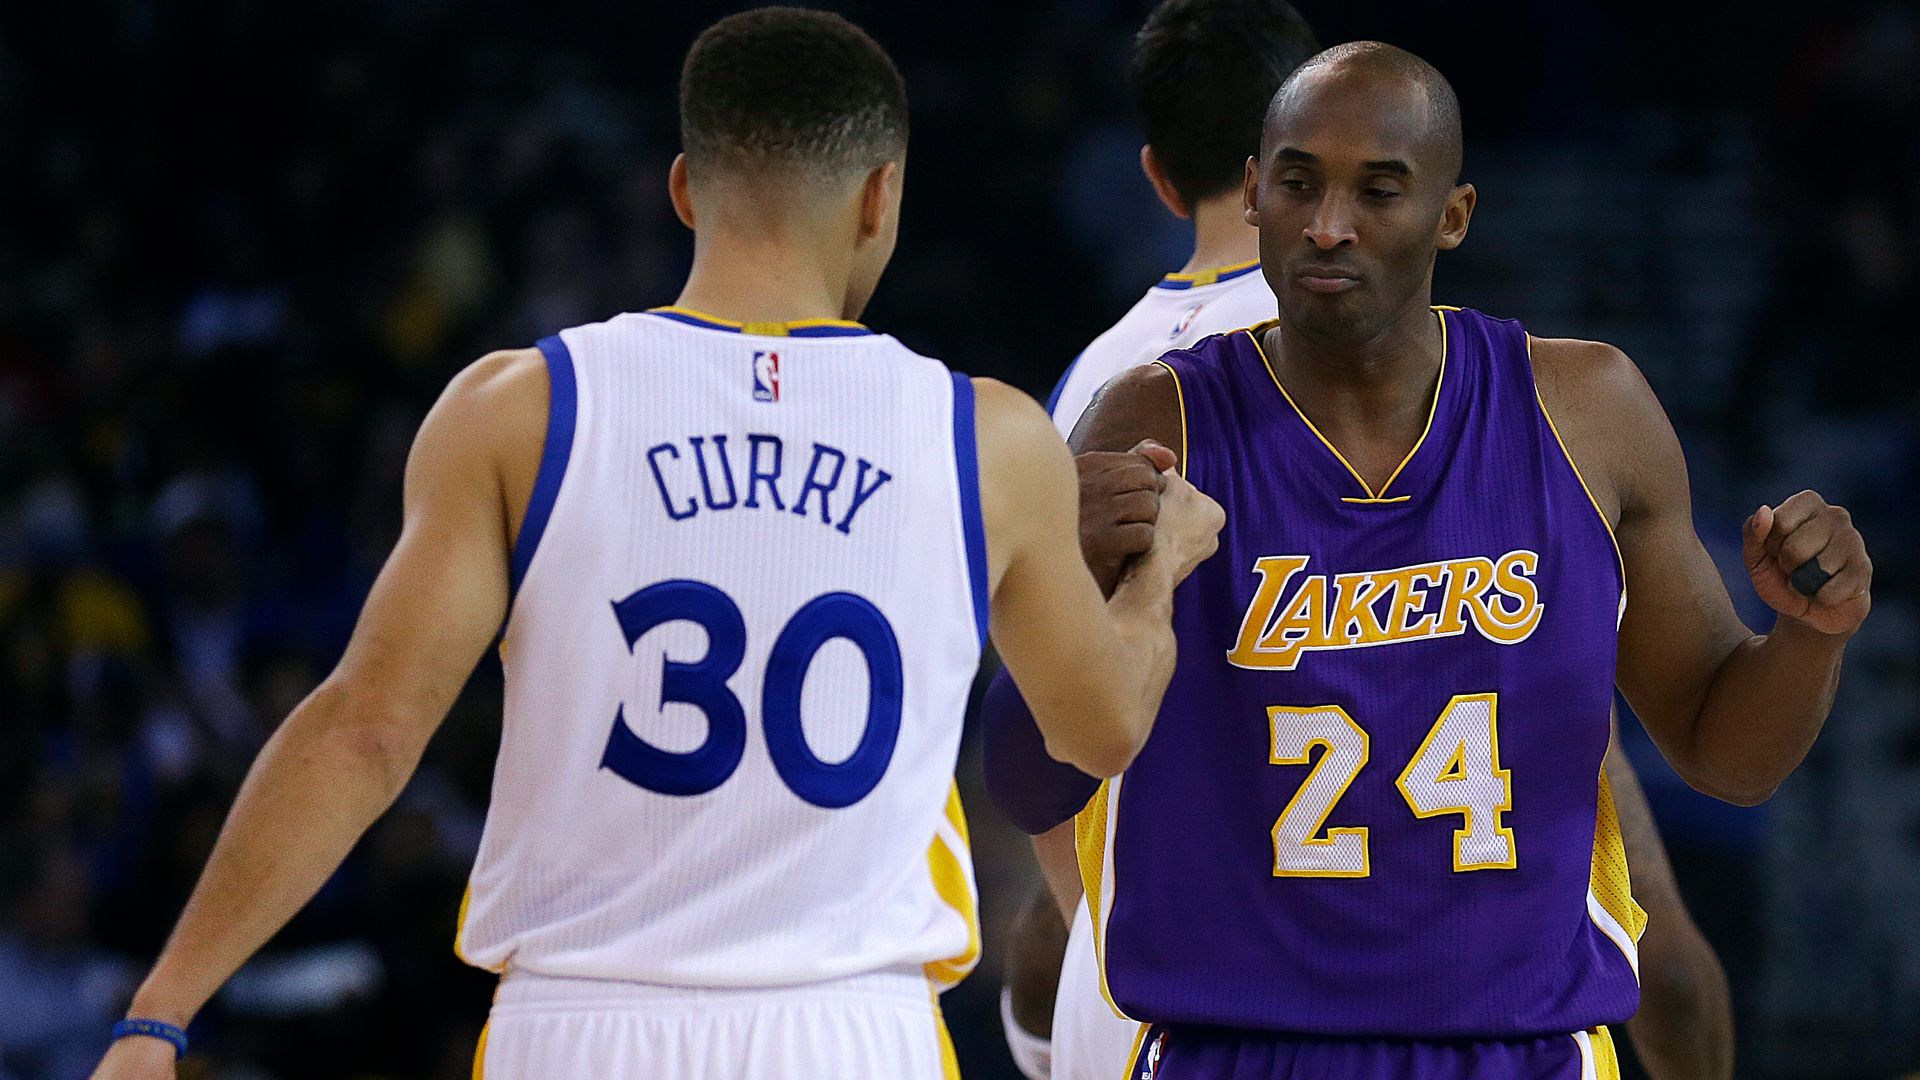 Those Guys Are Stone Cold Killers: When Kobe Bryant Lauded Stephen Curry And Klay Thompson